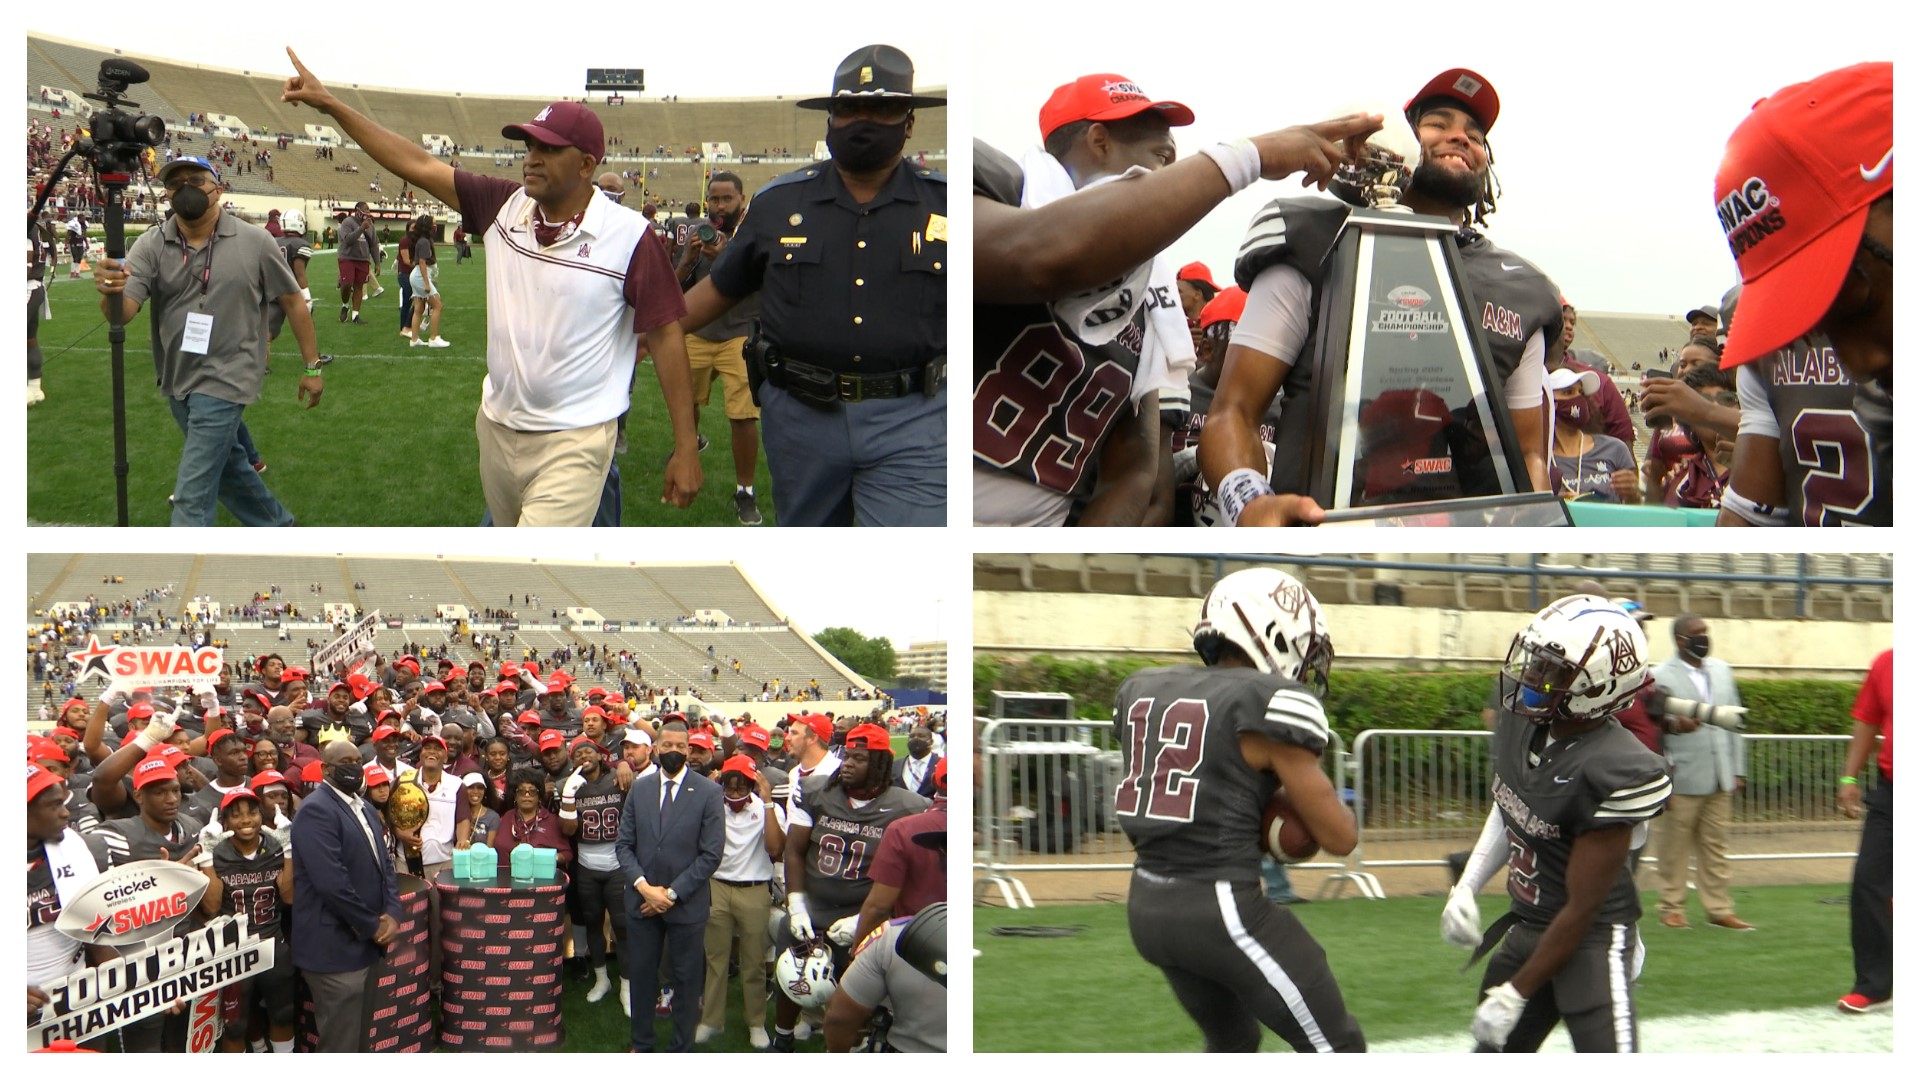 Alabama A&M defeated UAPB 40-33 in the SWAC Championship Saturday & are crowned HBCU national champions, finishing No. 1 in the final BOXTOROW Coaches & Media Poll